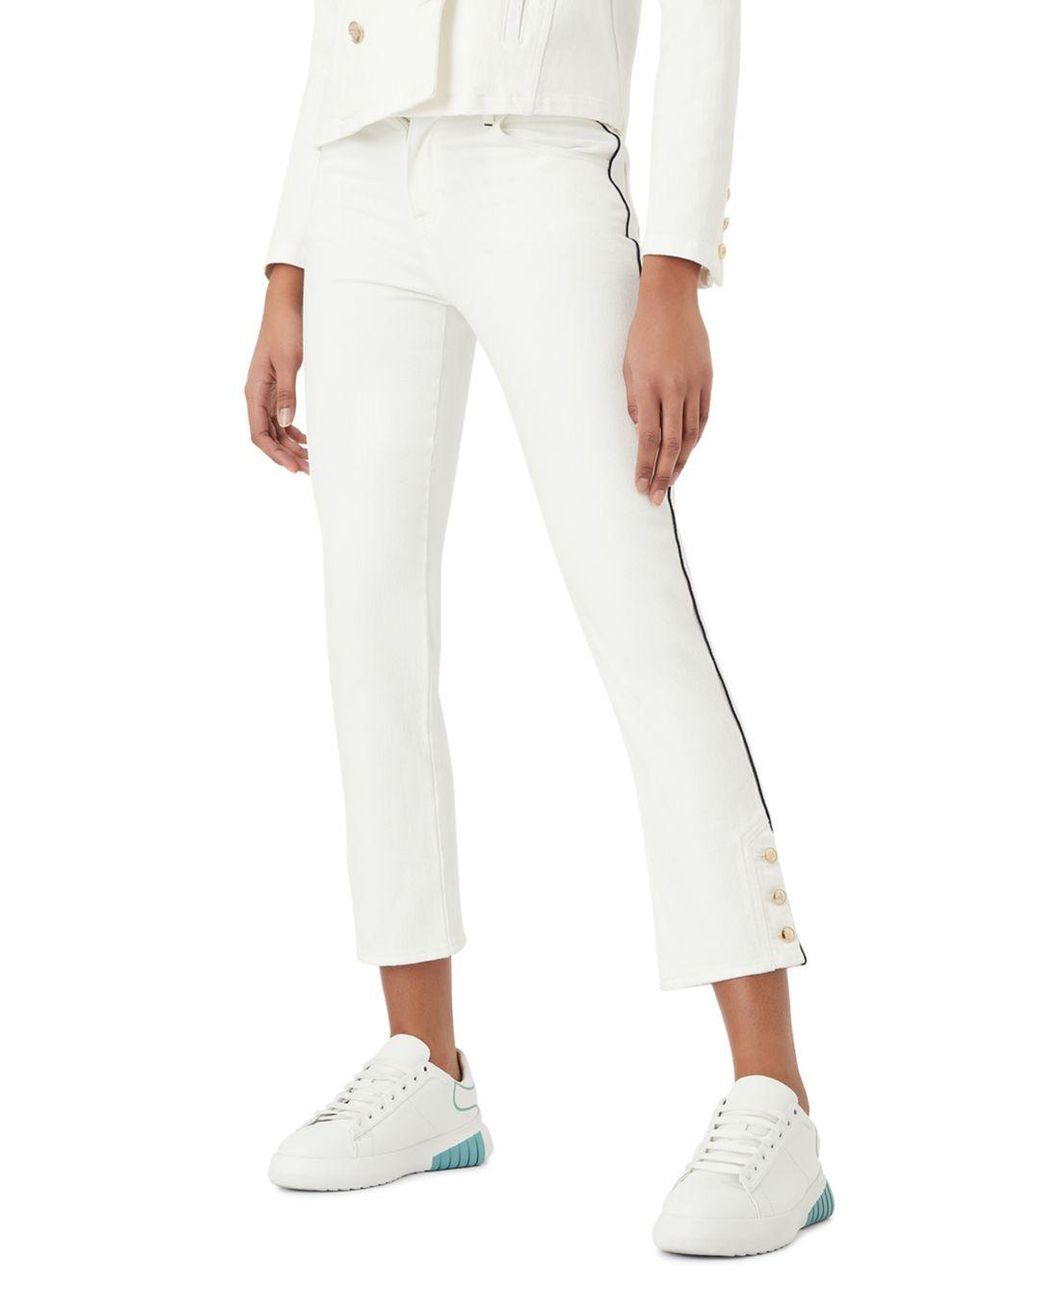 Armani Emporio Tasche Piped Cropped Skinny Jeans in White | Lyst